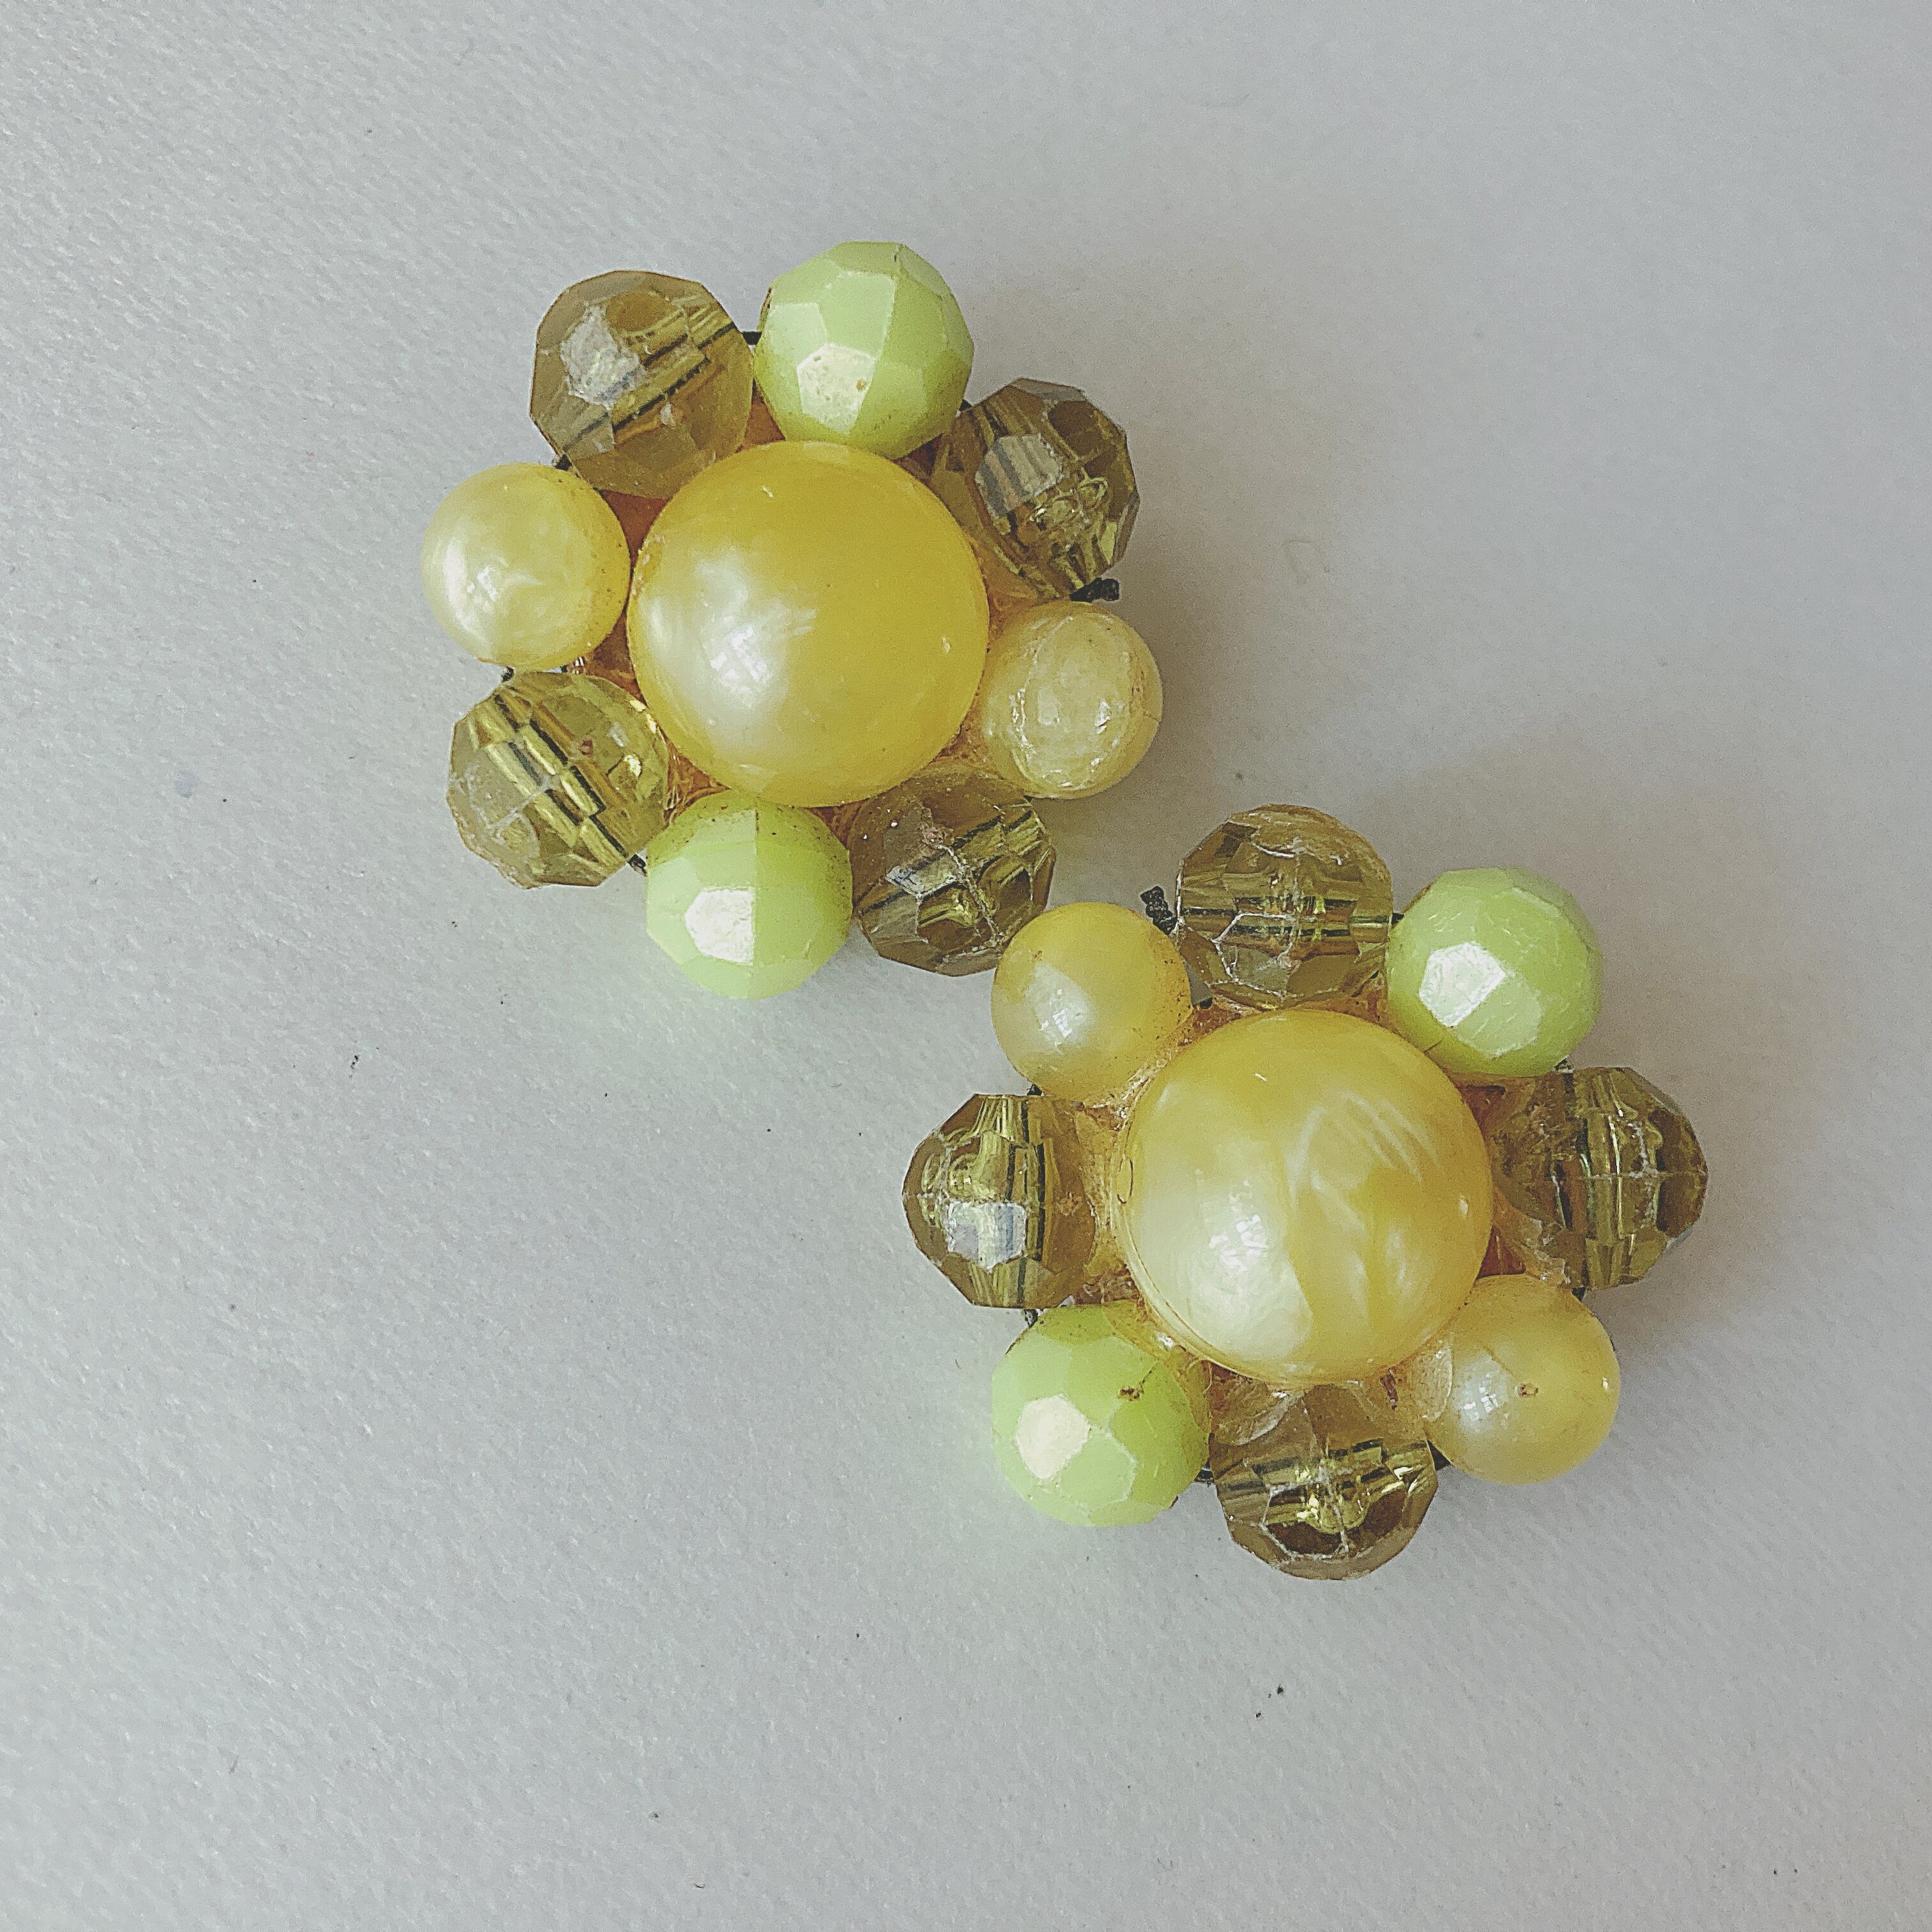 Vintage 50s 60s yellow green beads flower cluster earrings ヴィンテージ 50年代  60年代 イエロー グリーン ビーズ フラワー 花 クラスター イヤリング b1677 OBAKEPEACH